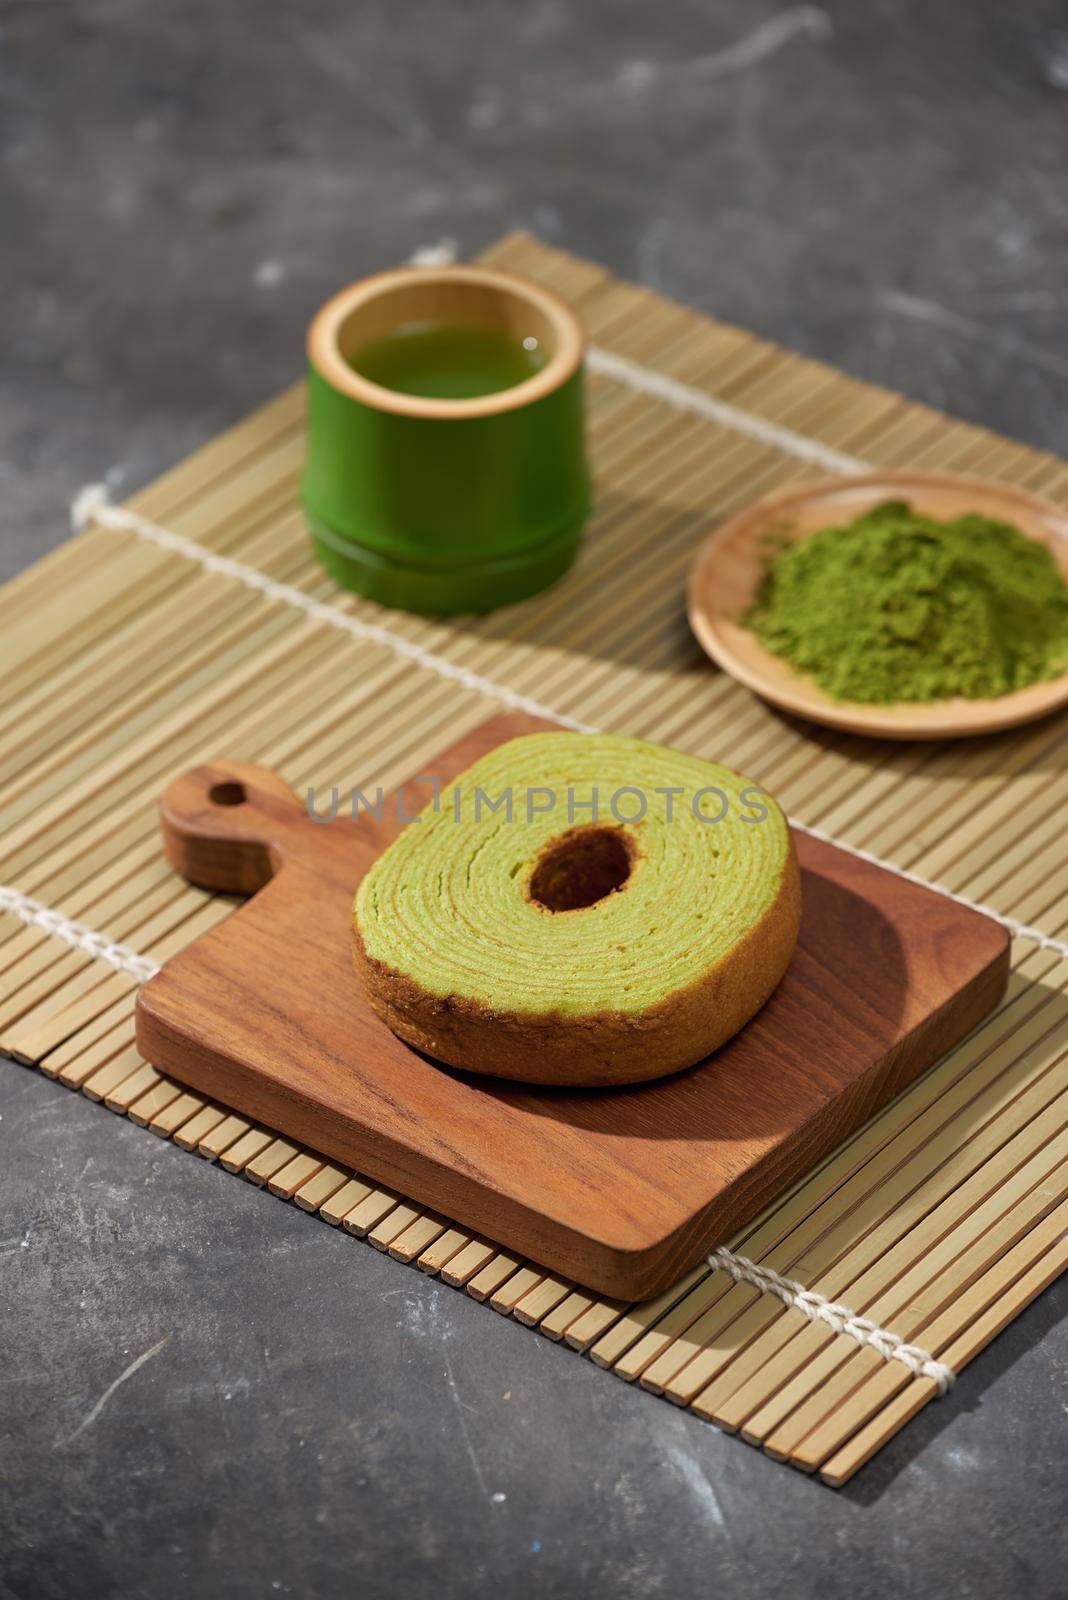 Matcha green tea latte in a cup and tea ceremony utensils with German cake. Copy space by makidotvn